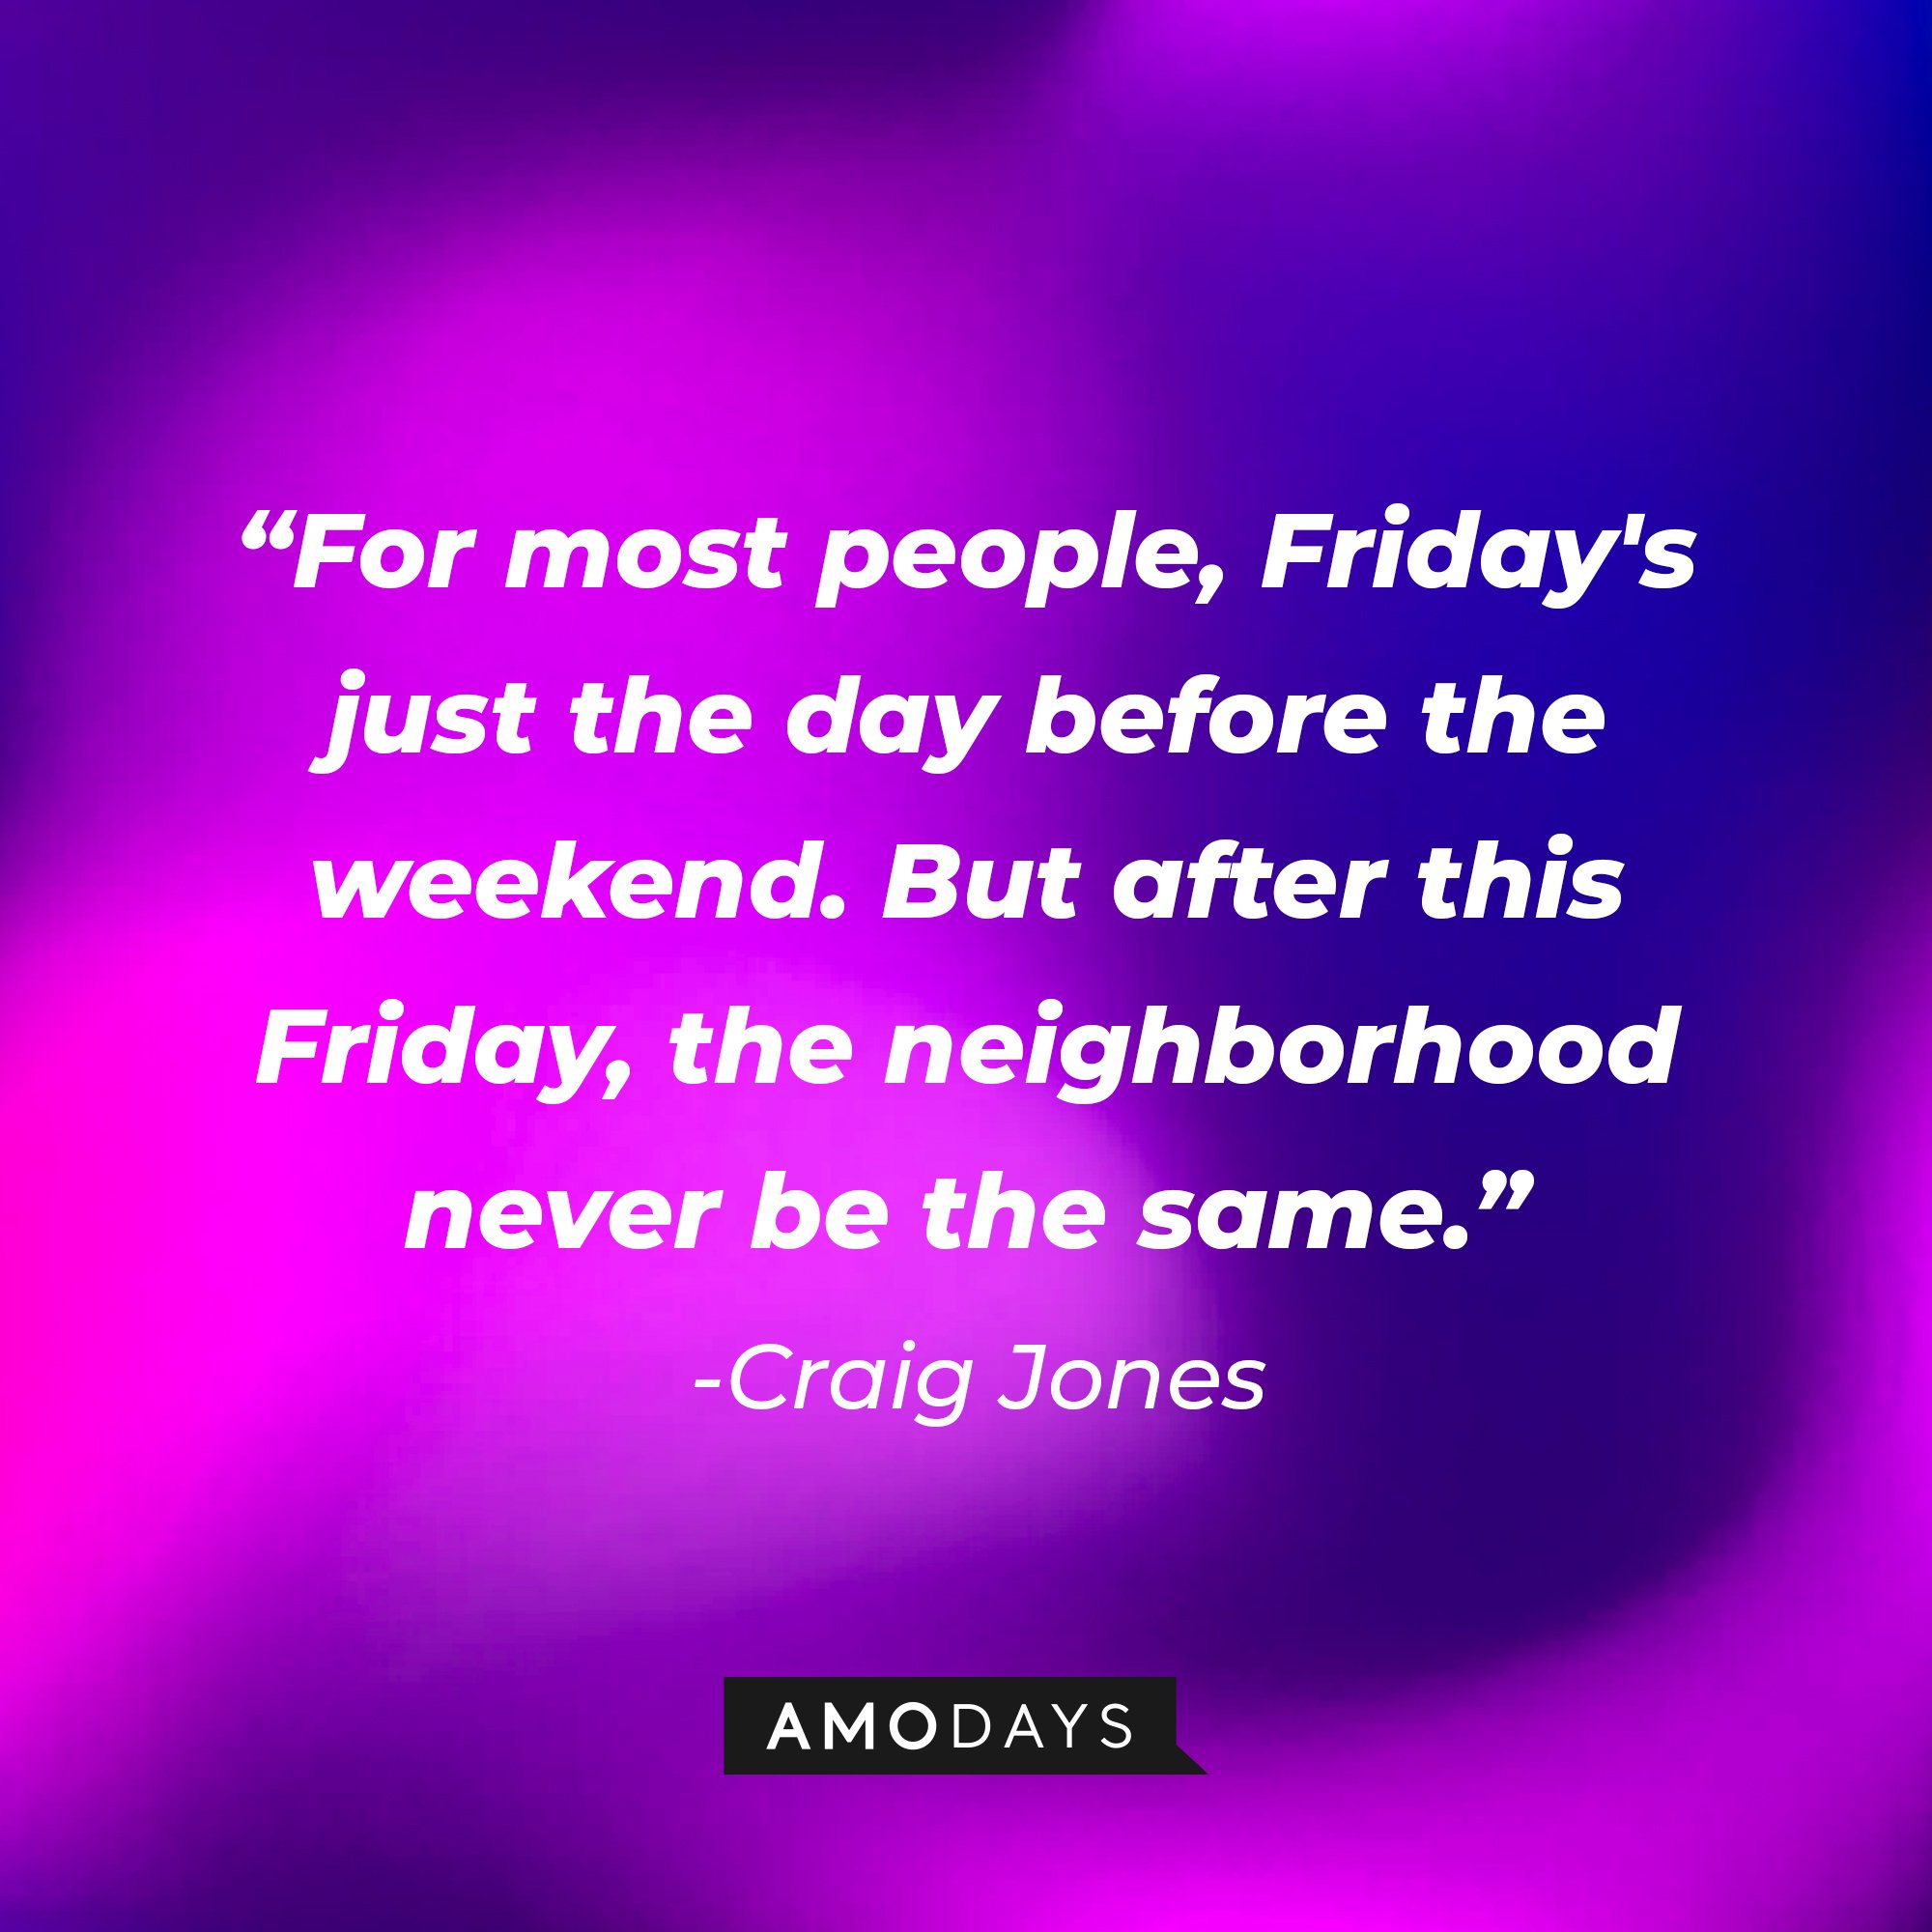 Craig Jones’ quote: "For most people, Friday's just the day before the weekend. But after this Friday, the neighborhood never be the same." | Image: AmoDays